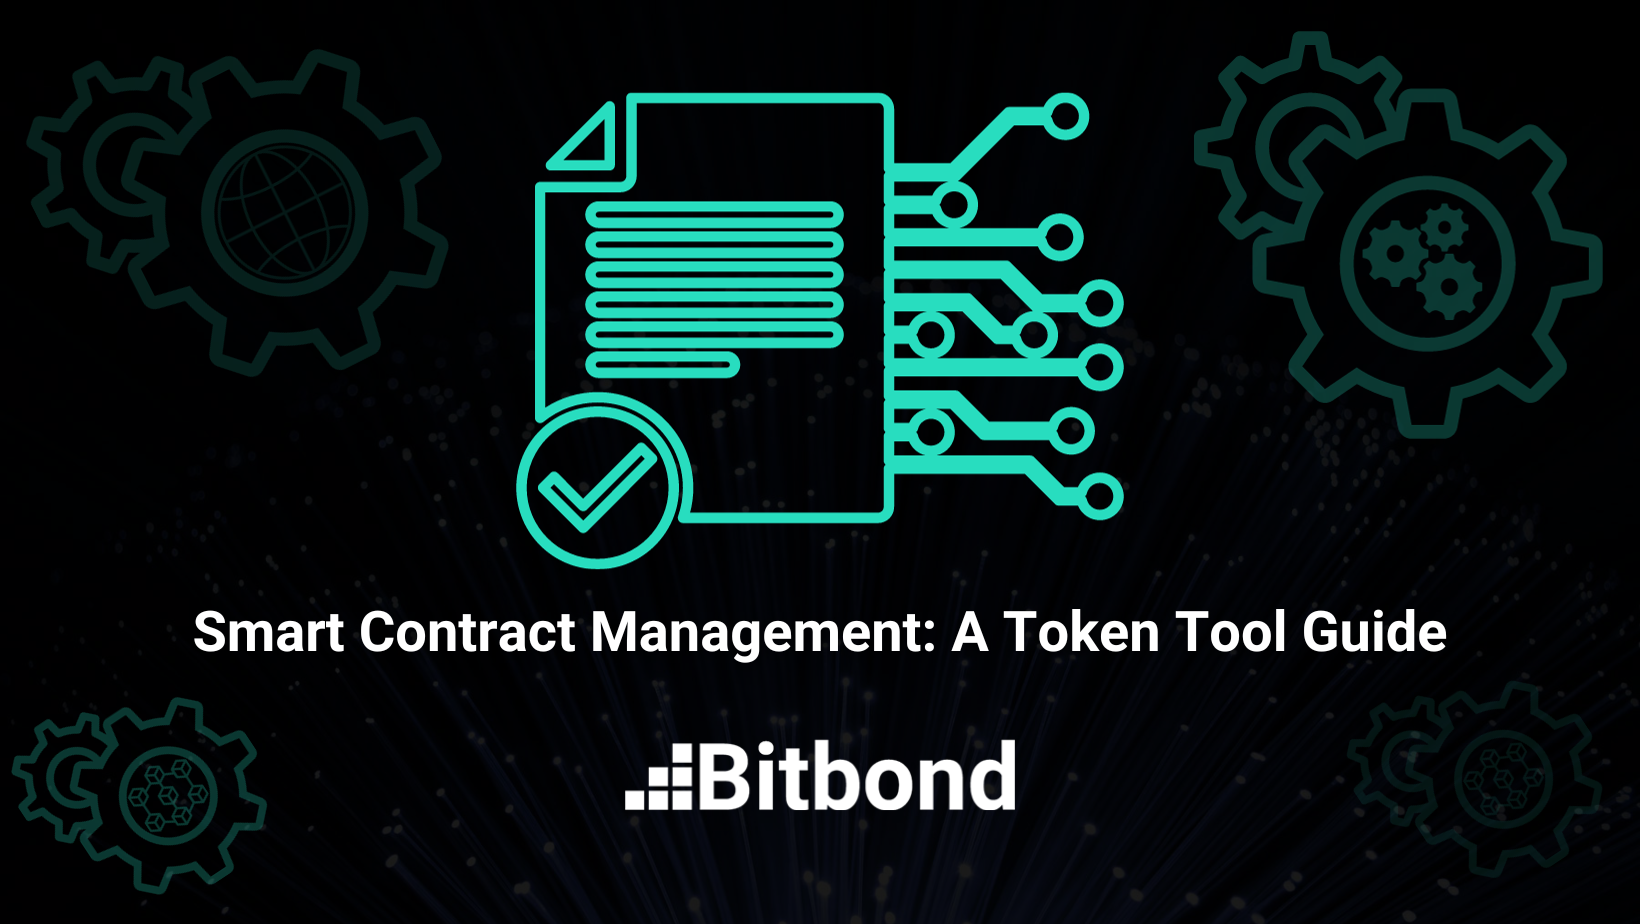 Guide about smart contract management and the top tools